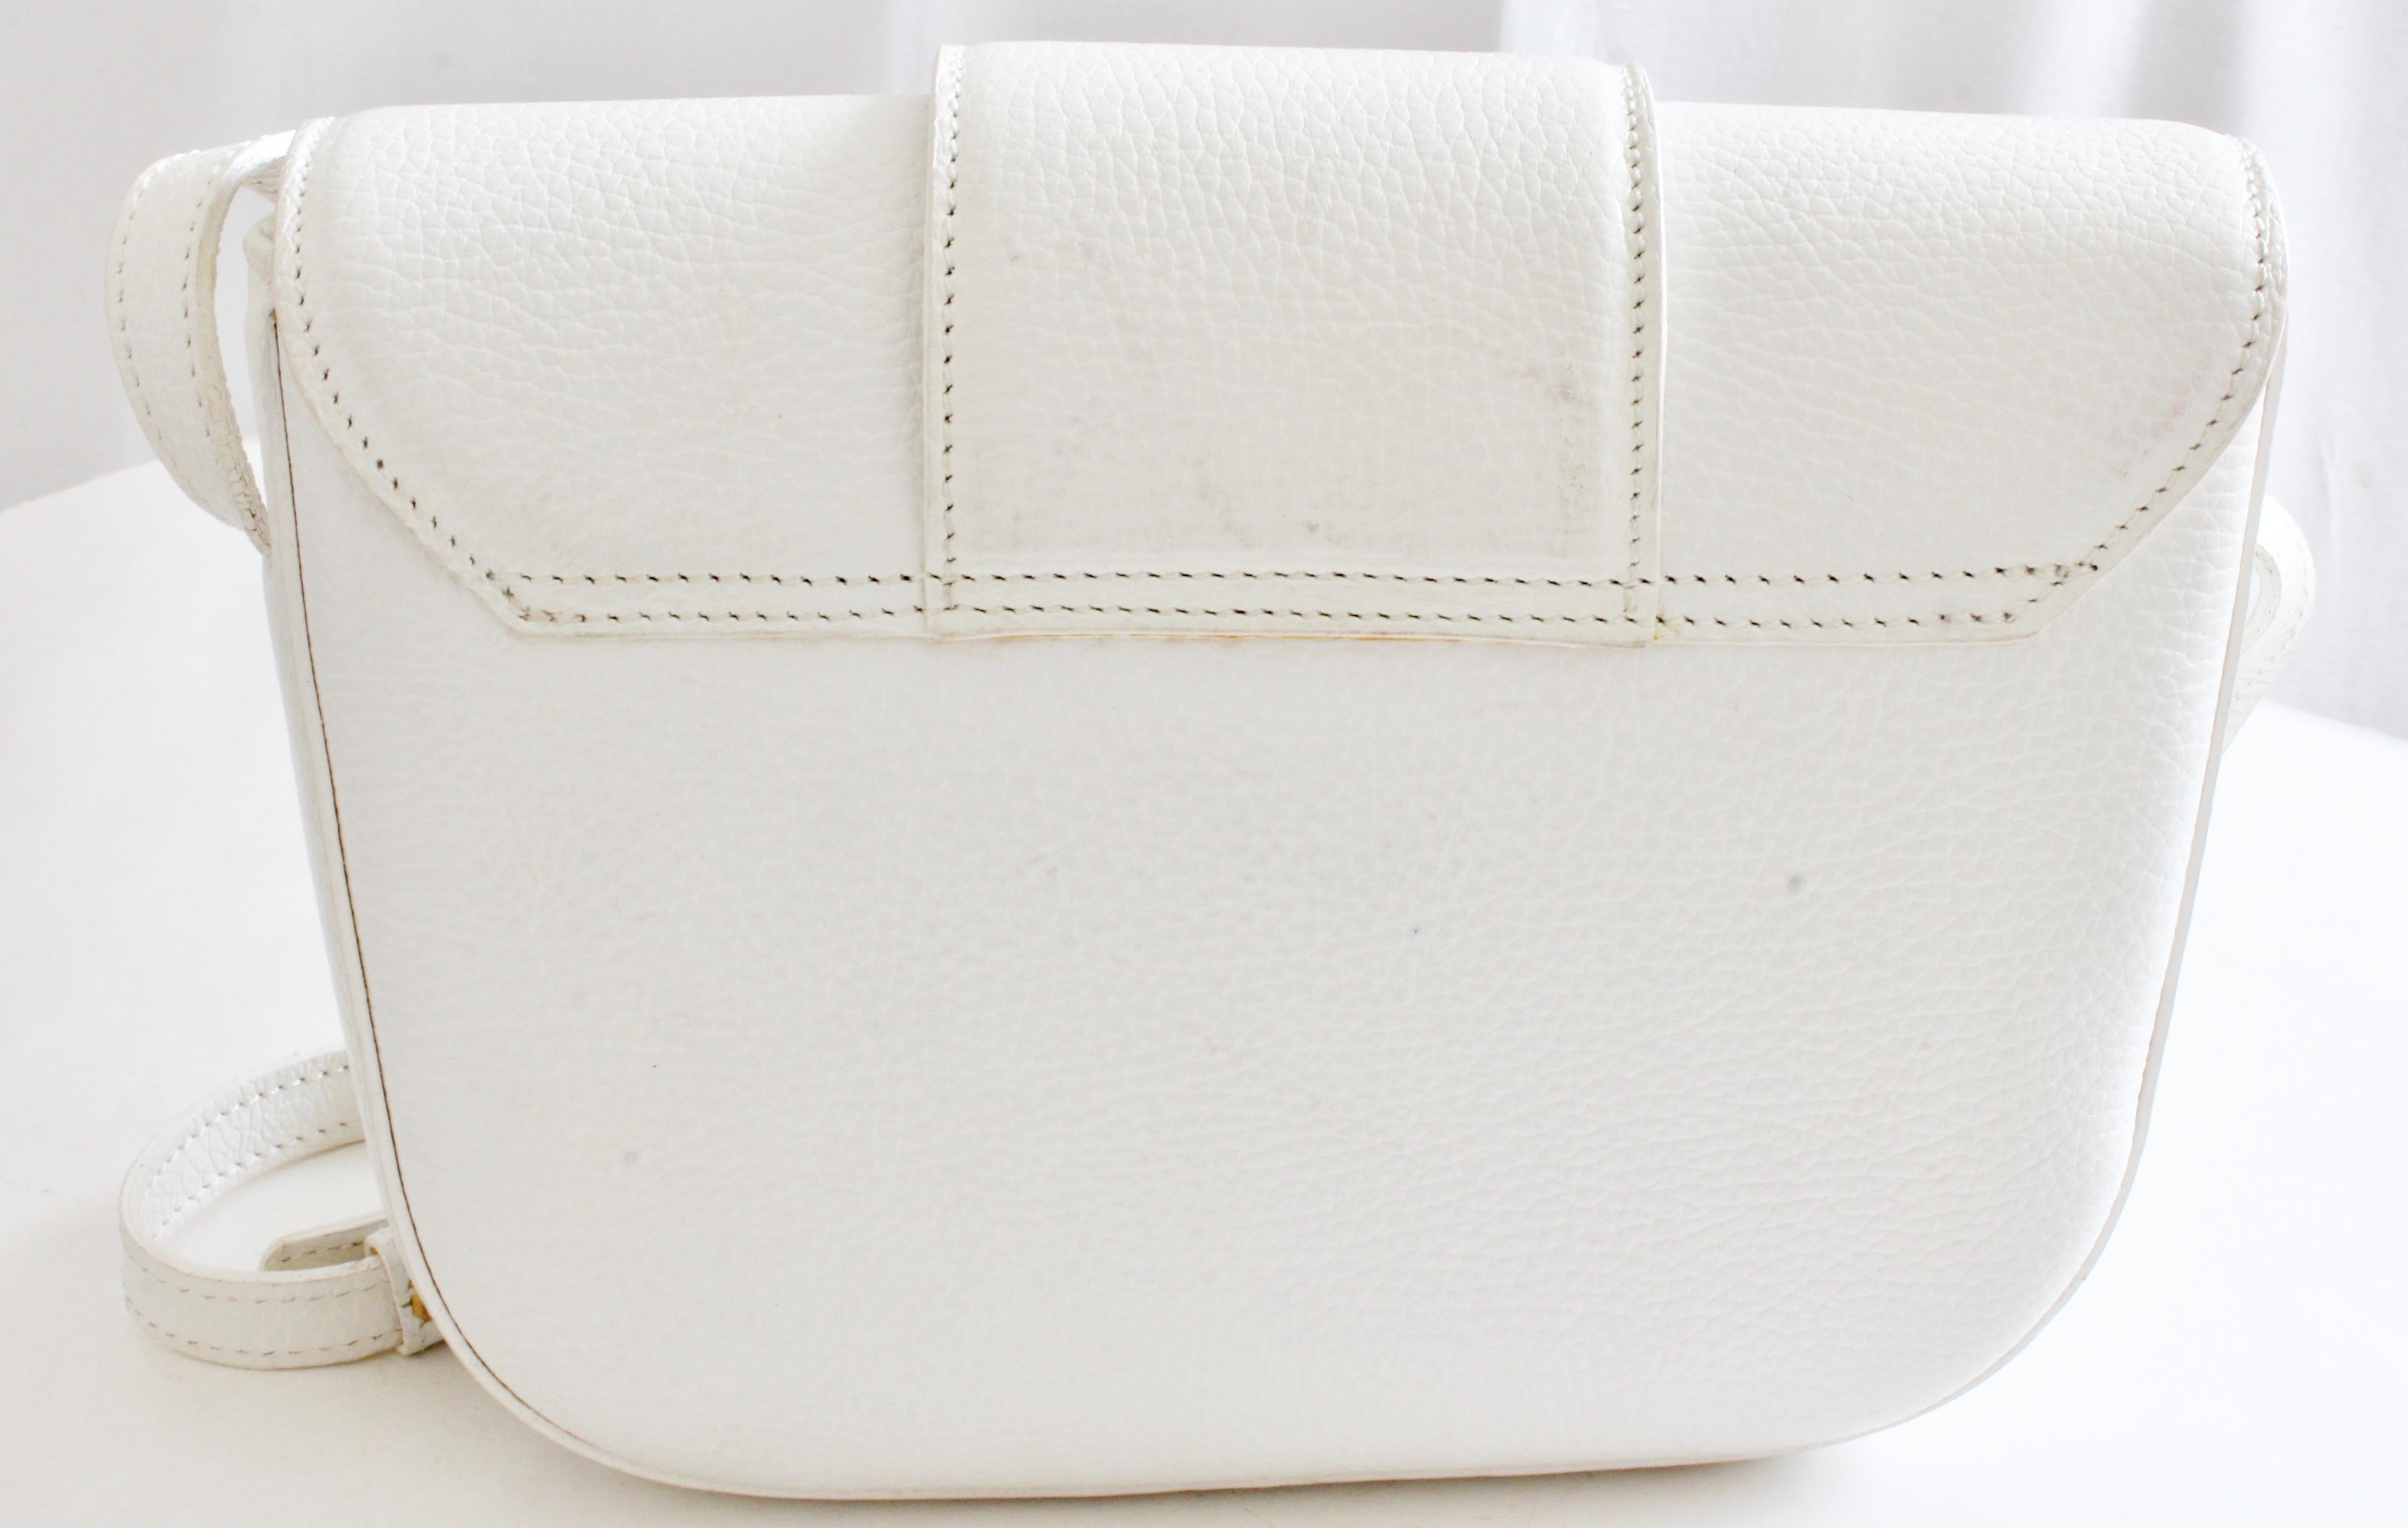 Bally Crossbody Bag White Pebbled Leather Top Flap Shoulder Bag Italy 5